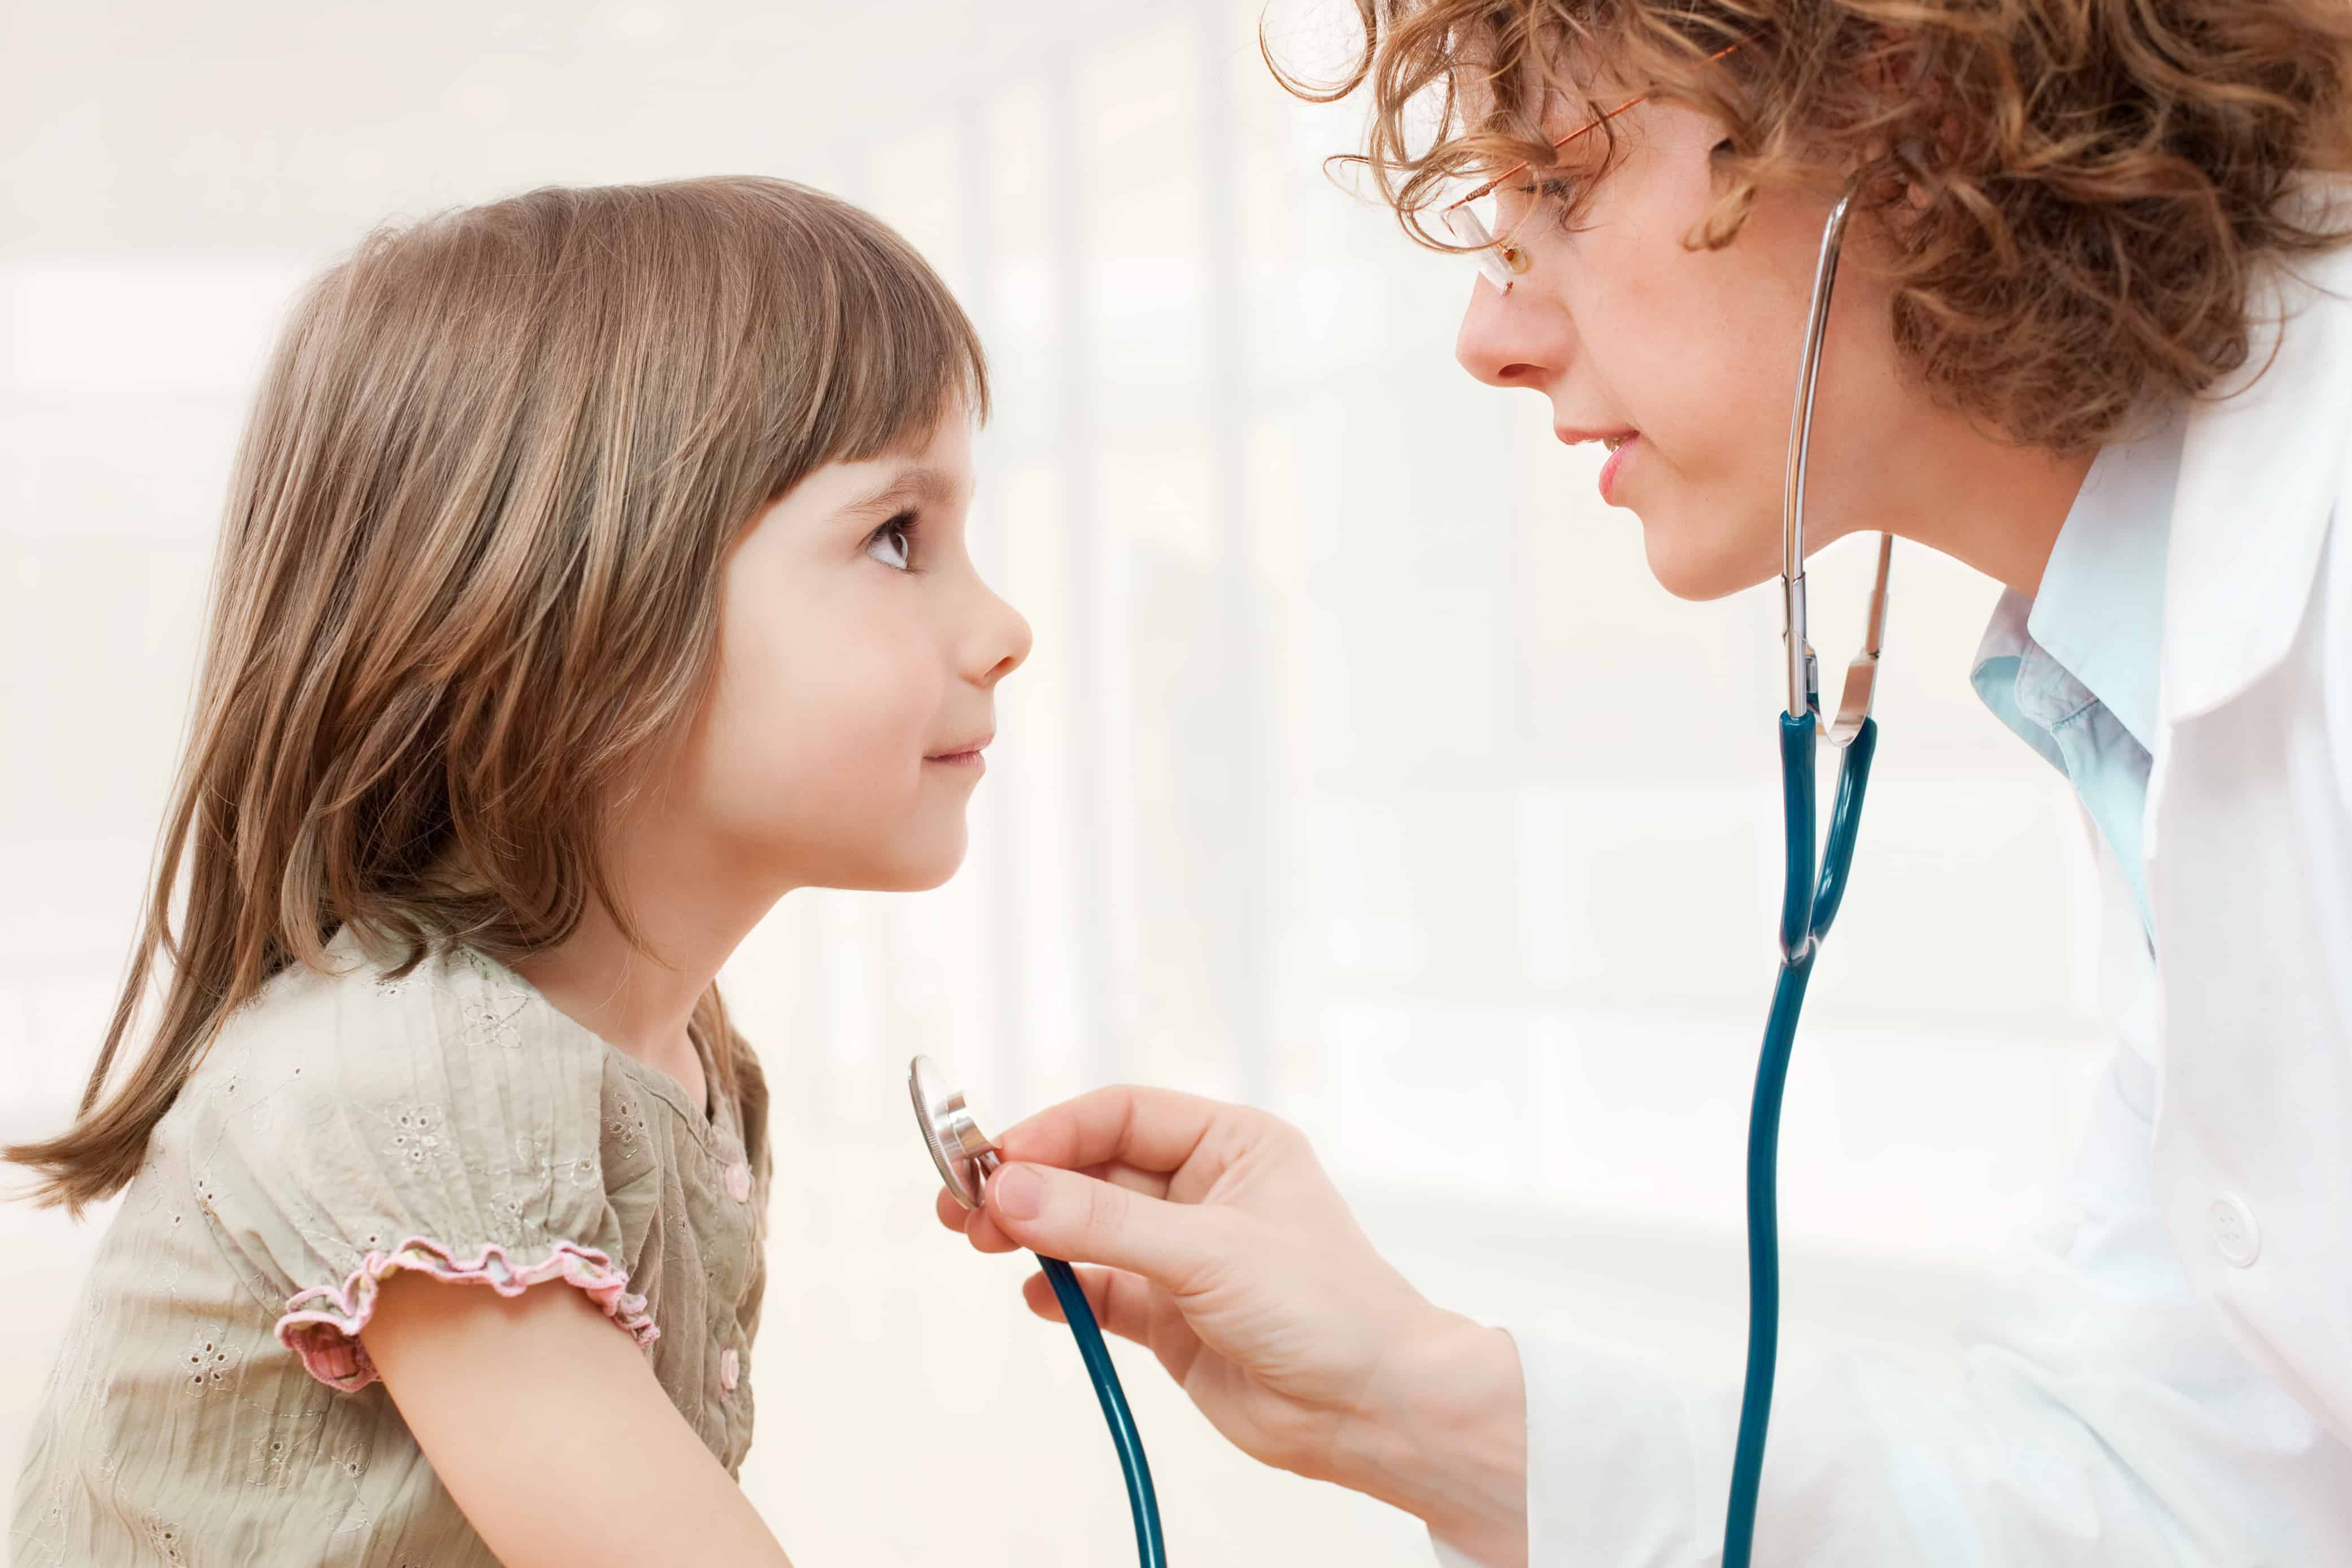 Physician with a stethescope examining a child.